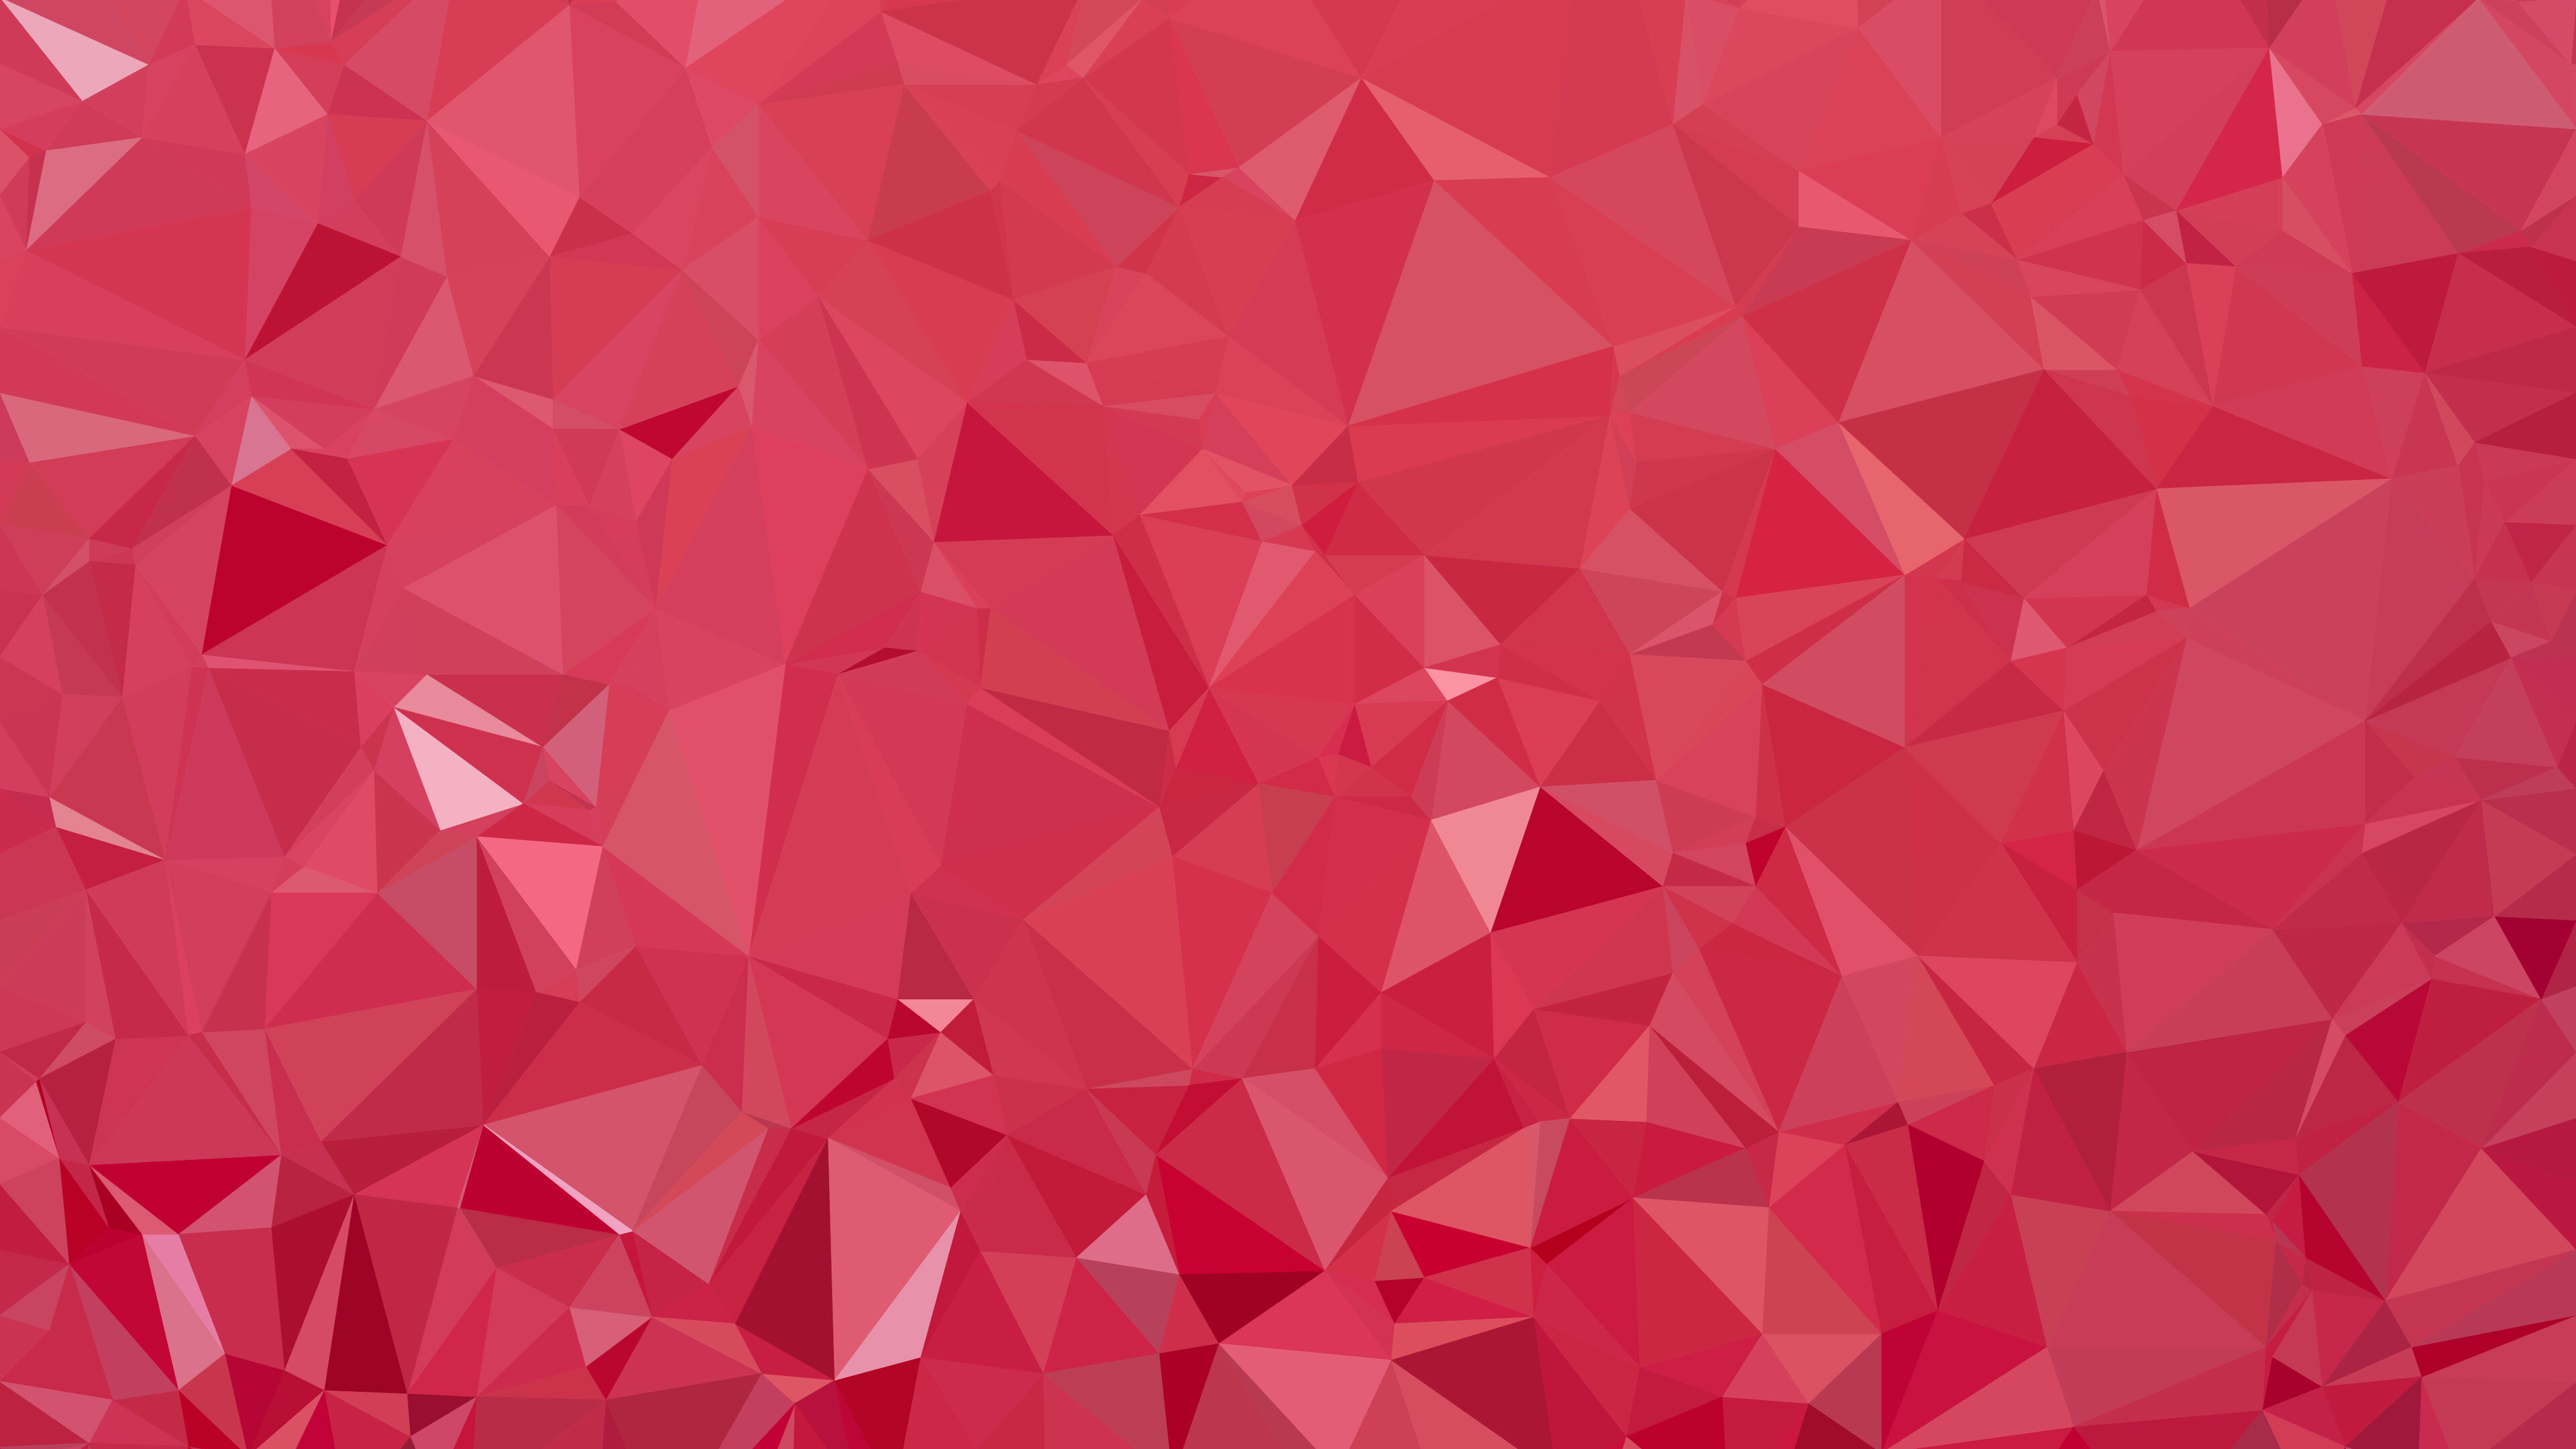 Geometry: Red polygons, Pink, Mosaic, Rhombus, Triangles. 3840x2160 4K Background.